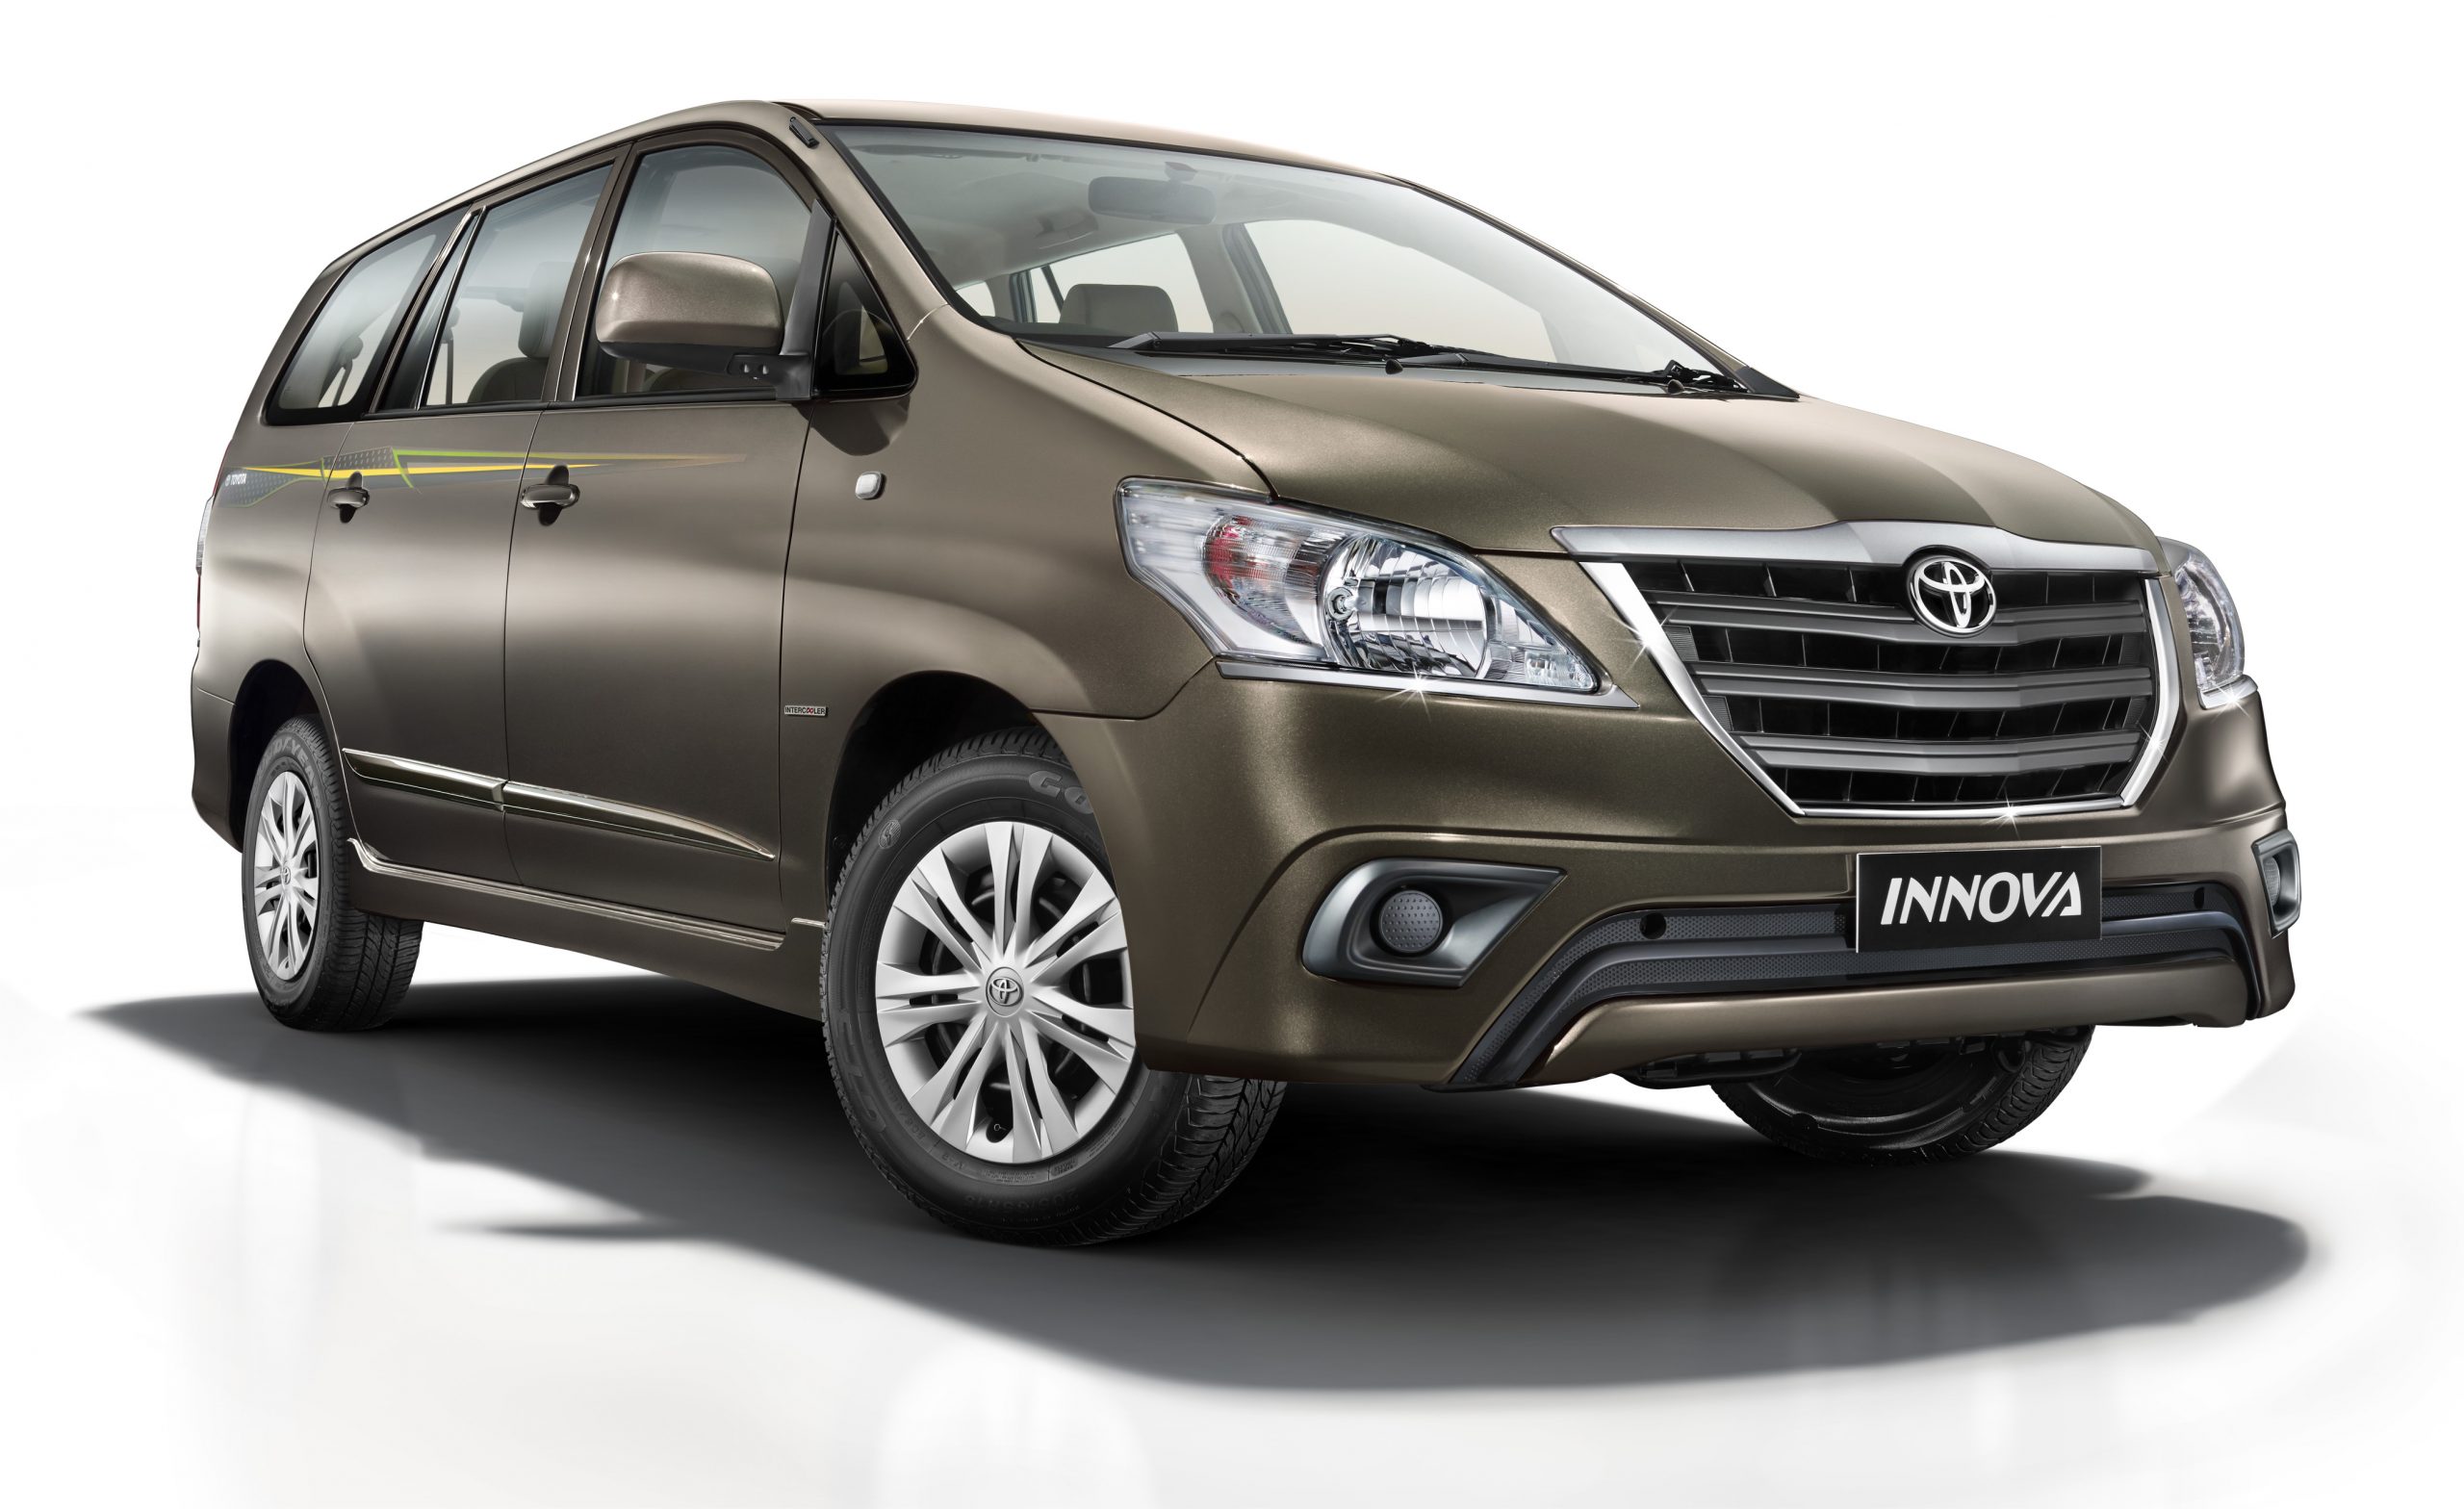 New 2014 Toyota Innova Limited Edition Launched Price, Pic & Details